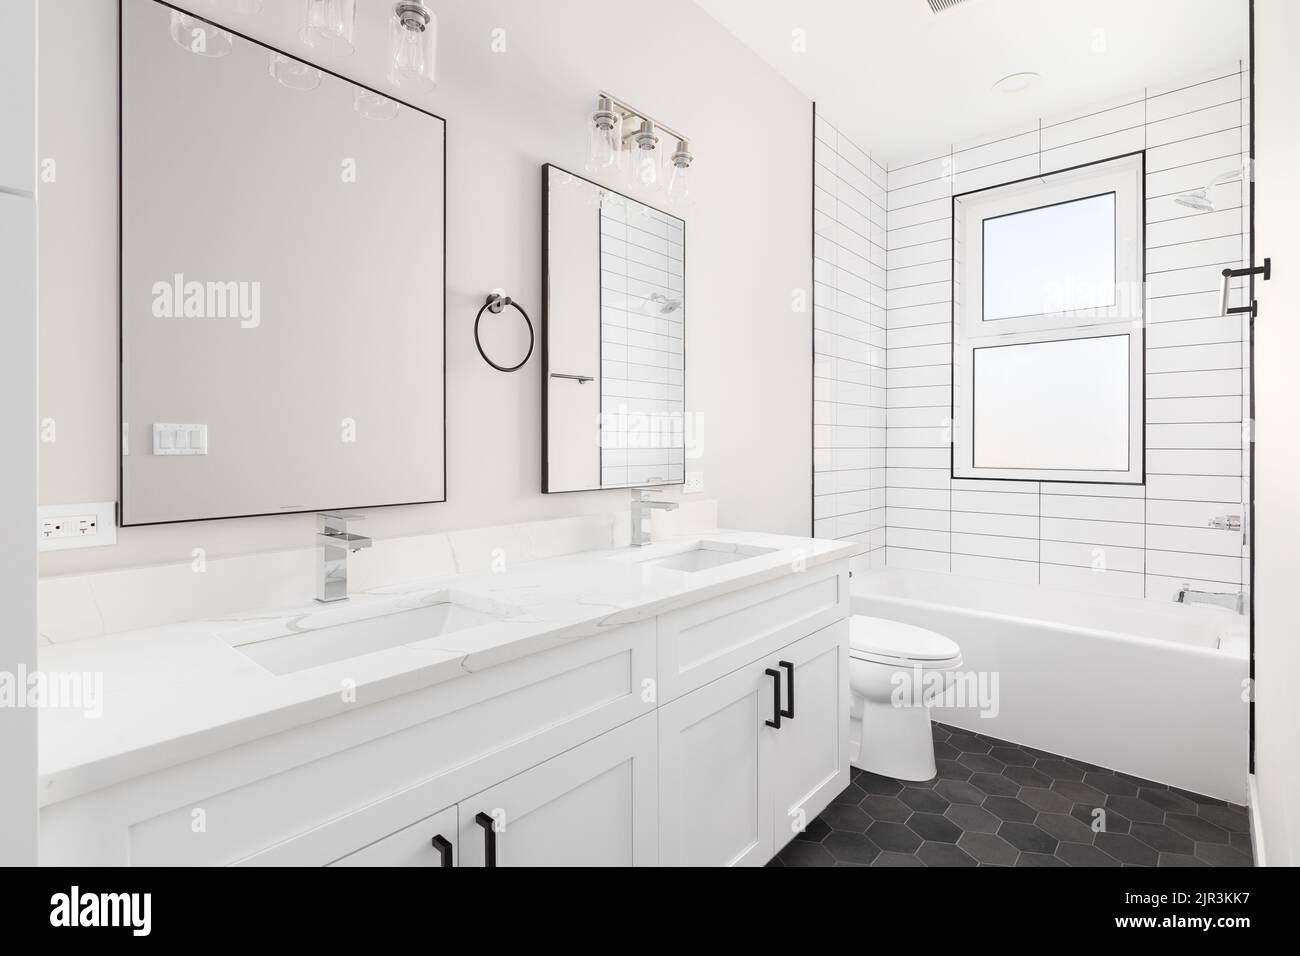 A white luxury bathroom with a white vanity cabinet and marble countertop, subway tile shower, and dark hexagon tiled flooring. Stock Photo